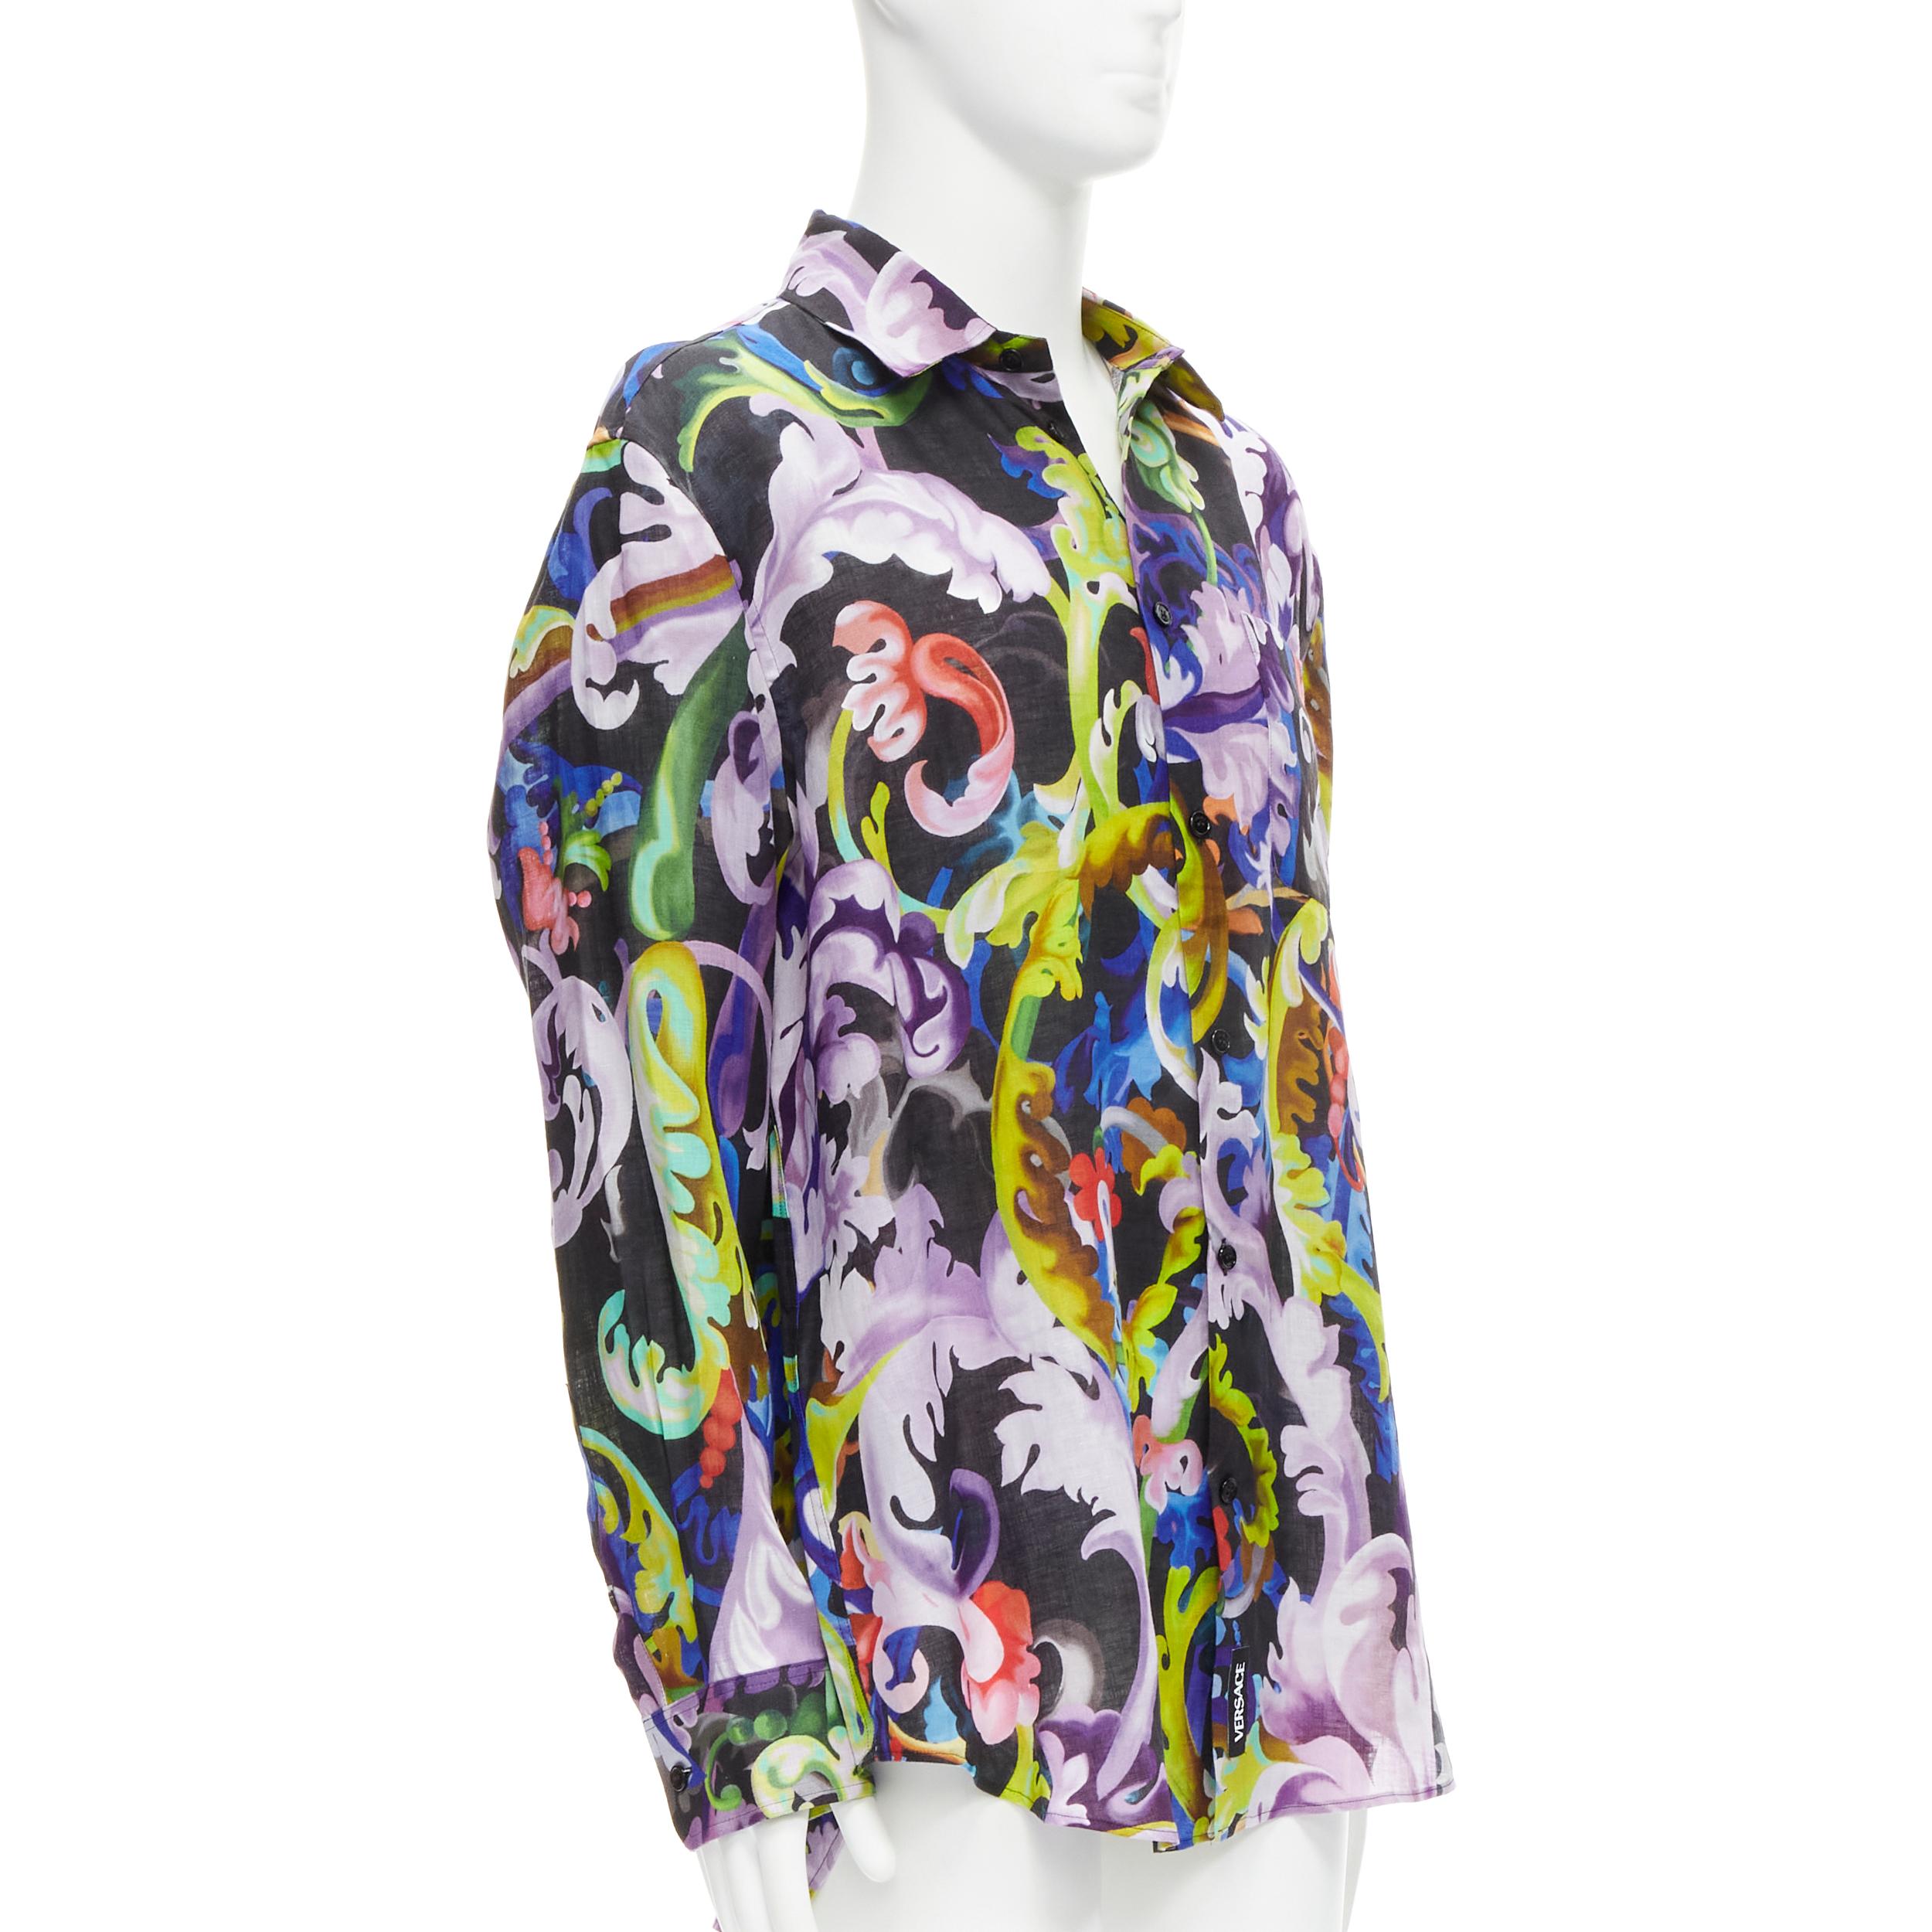 new VERSACE 2021 Runway Baroccoflage colorful baroque floral linen shirt EU39 M
Reference: TGAS/C01835
Brand: Versace
Model: 1000920 1A00628 5B020
Collection: 2021 - Runway
Material: Linen
Color: Multicolour
Pattern: Floral
Closure: Button
Extra